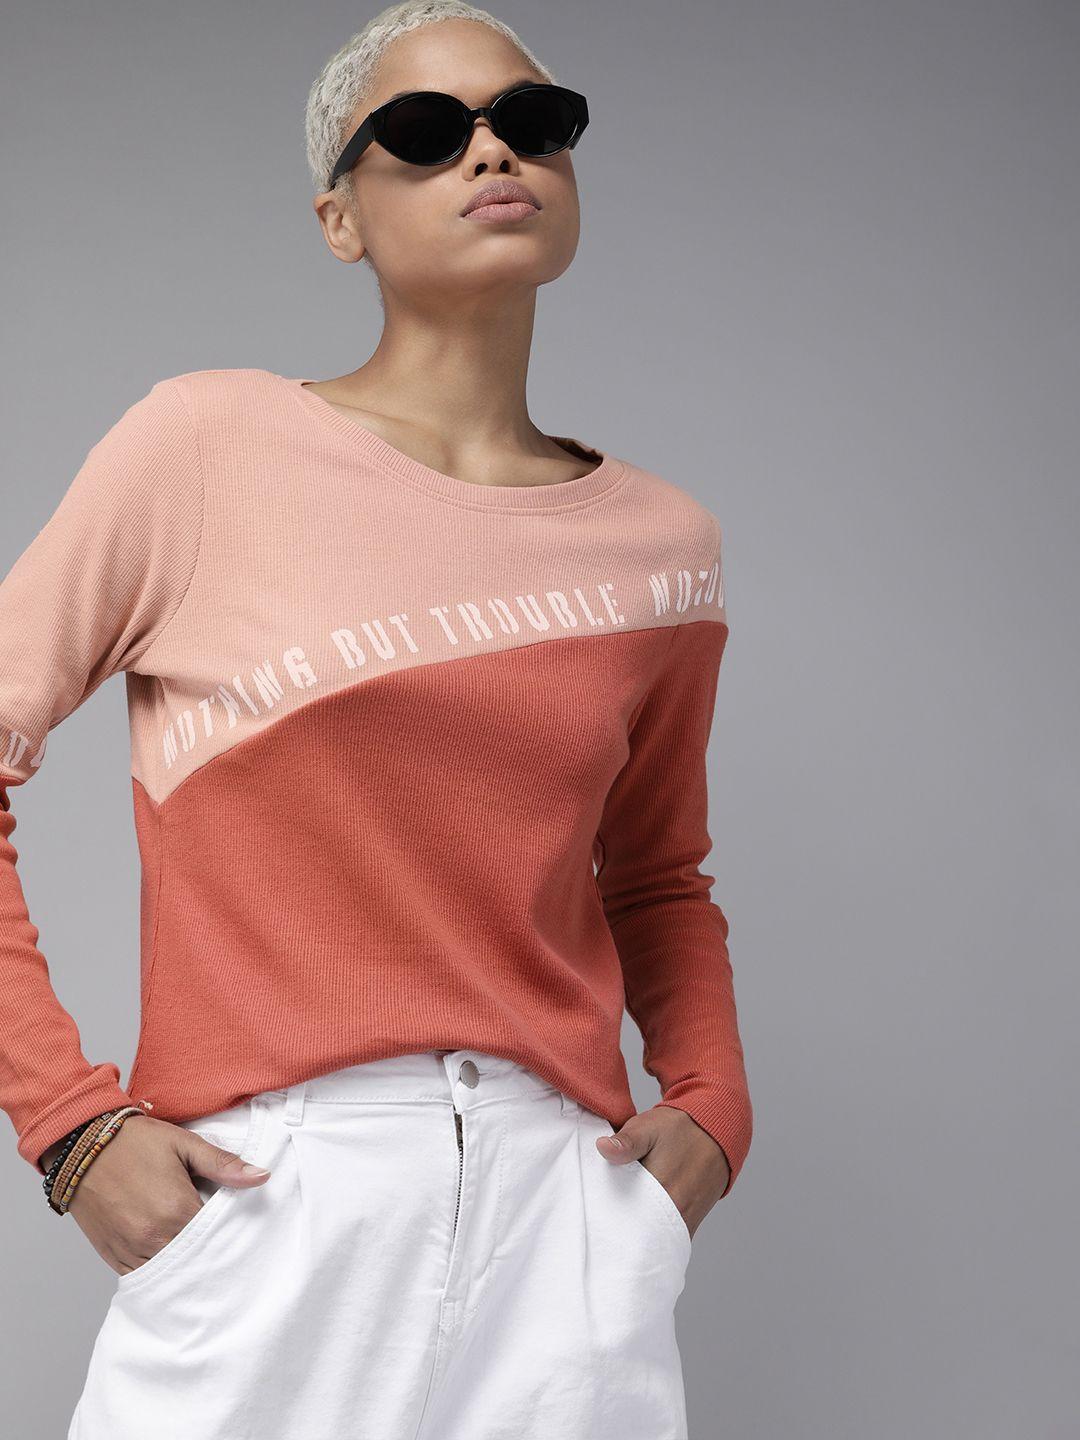 roadster-women-rose-&-pink-colourblocked-long-sleeves-round-neck-top